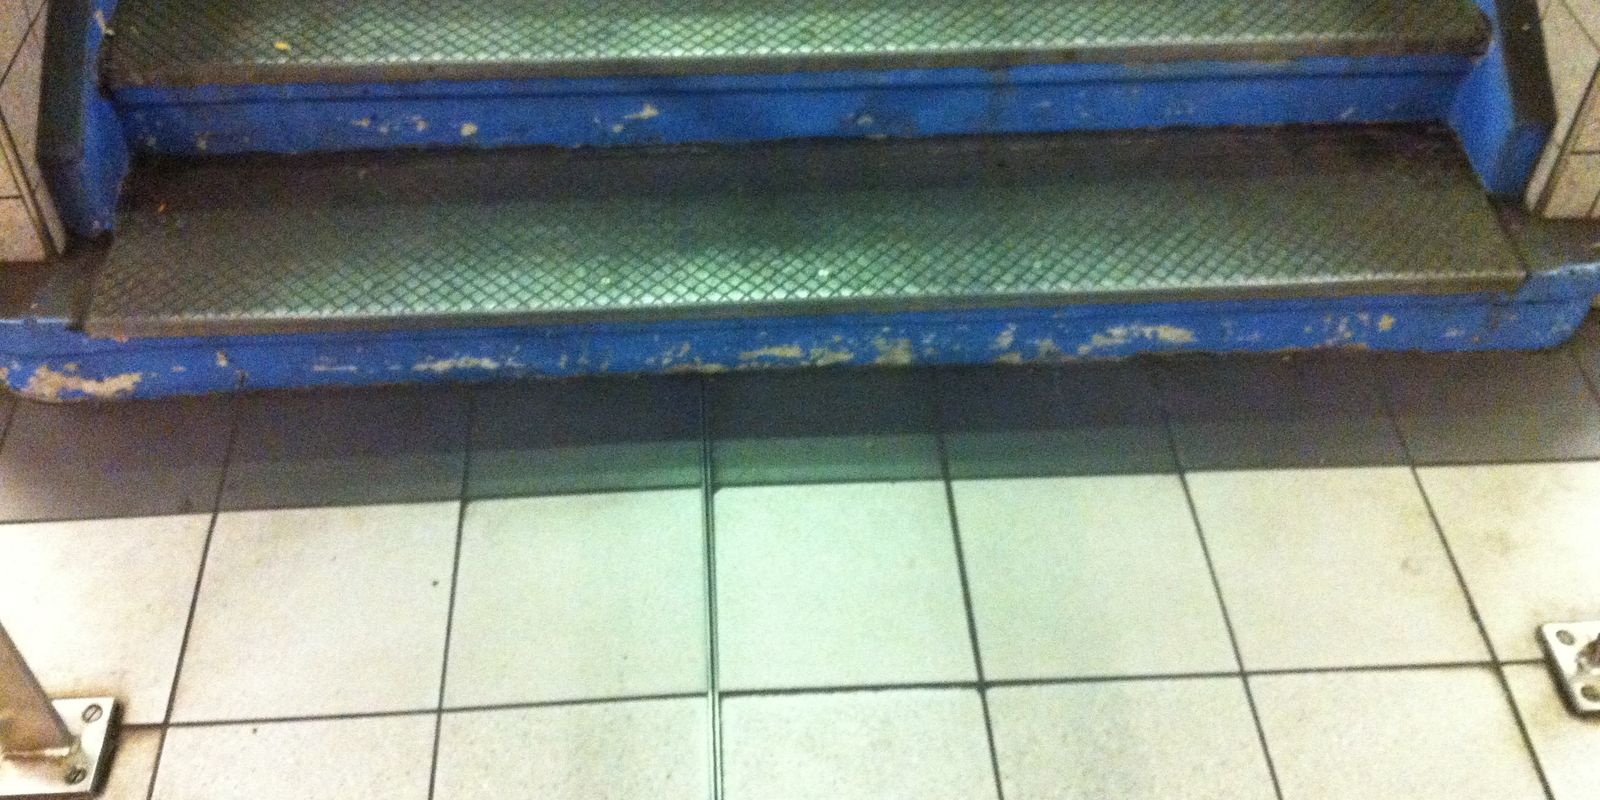 Patco Stairs